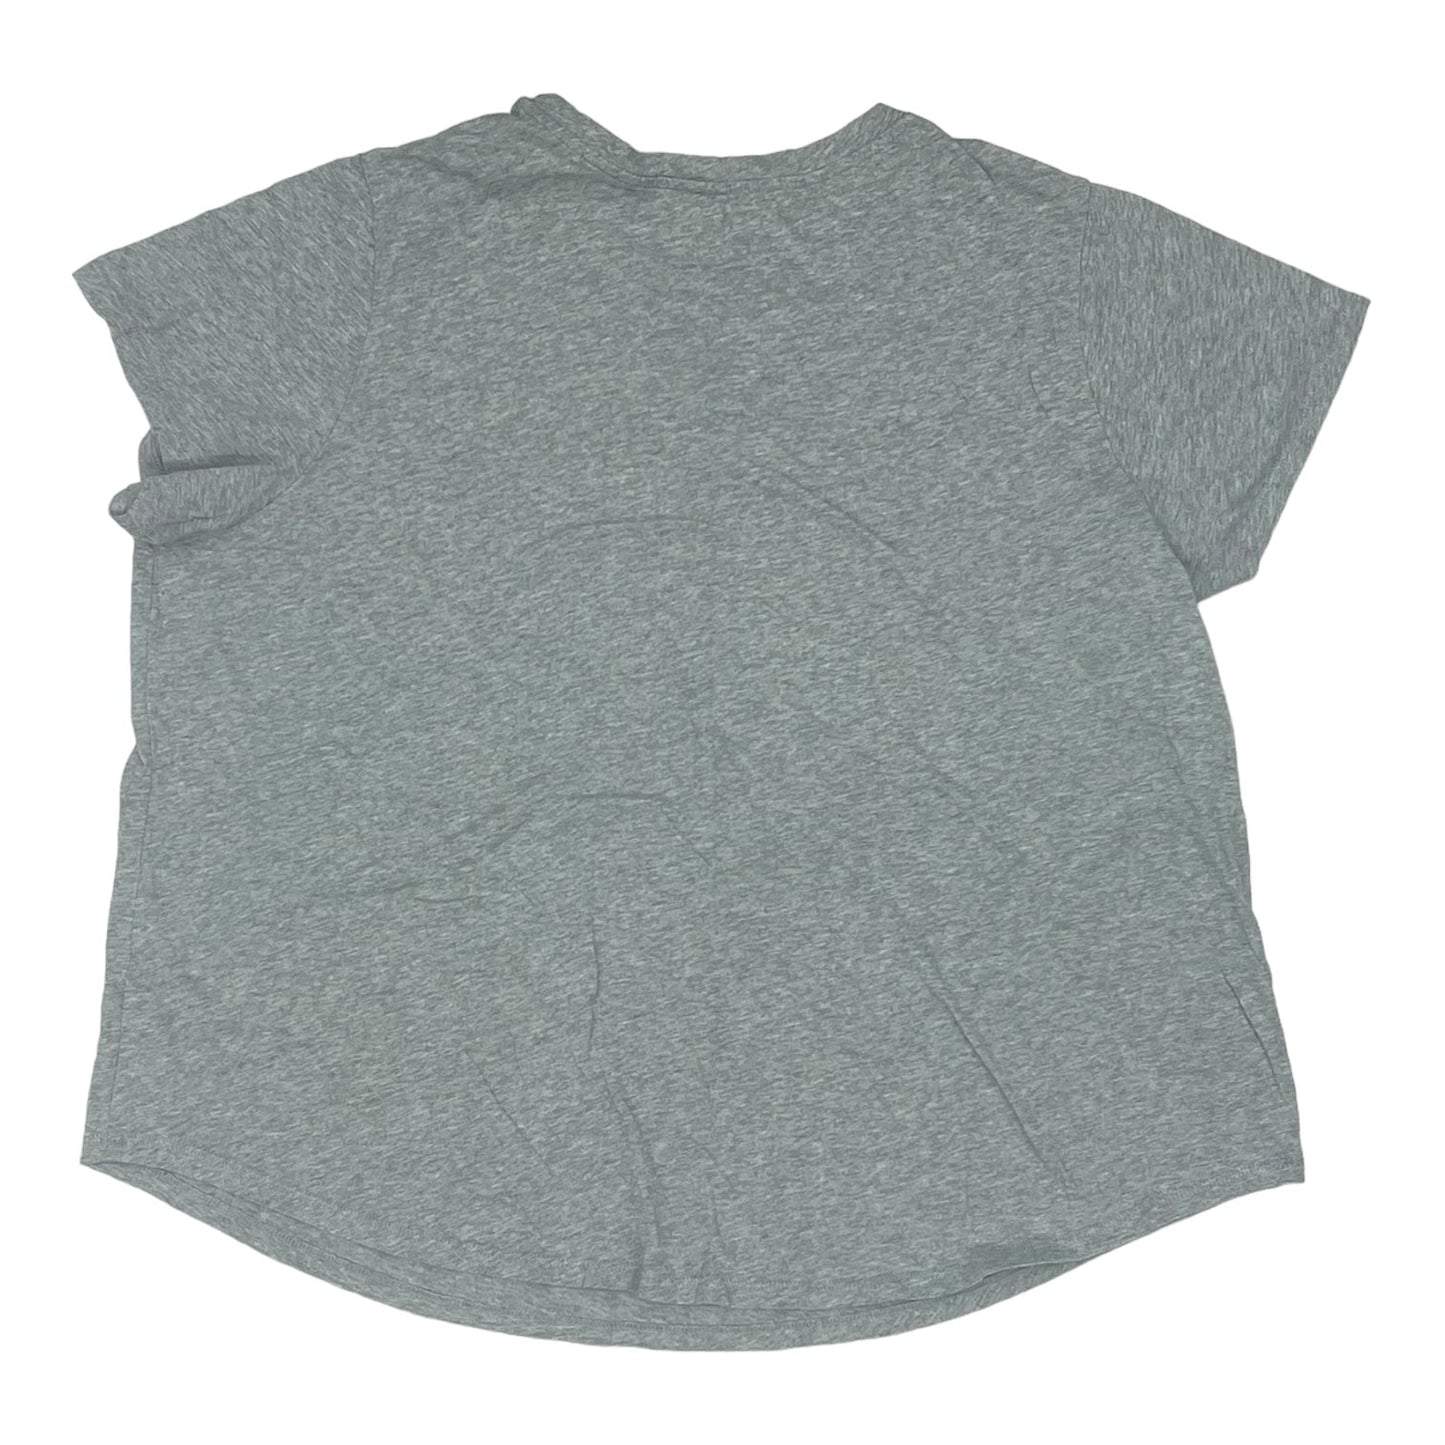 GREY OLD NAVY TOP SS BASIC, Size 2X